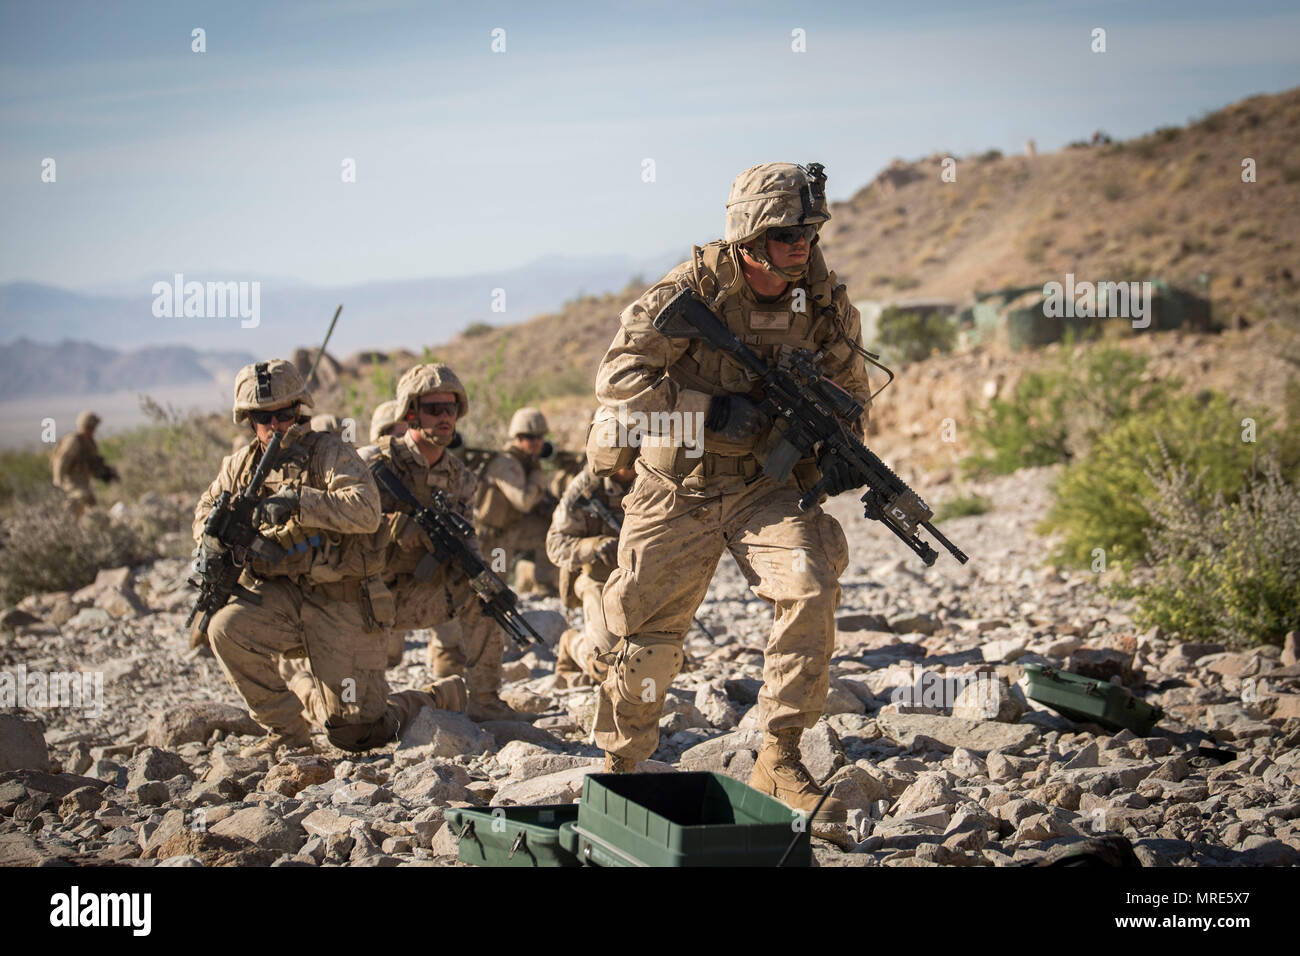 MARINE CORPS AIR GROUND COMBAT CENTER TWENTYNINE PALMS, California – Marines with Charlie Company, 1st Battalion, 8th Marine Regiment, prepare to move during a company reinforced assault exercise at Range 400 aboard Marine Corps Air Ground Combat Center, Twentynine Palms, California, May 8, 2017. The Marines conducted a company level assault reinforced by machine guns, vehicles, mortars and snipers as part of Integrated Training Exericse 3-17. ITX is a training evolution conducted five times a year to enhance the lethality and co-operability between the four elements of a Marine Air Ground Tas Stock Photo